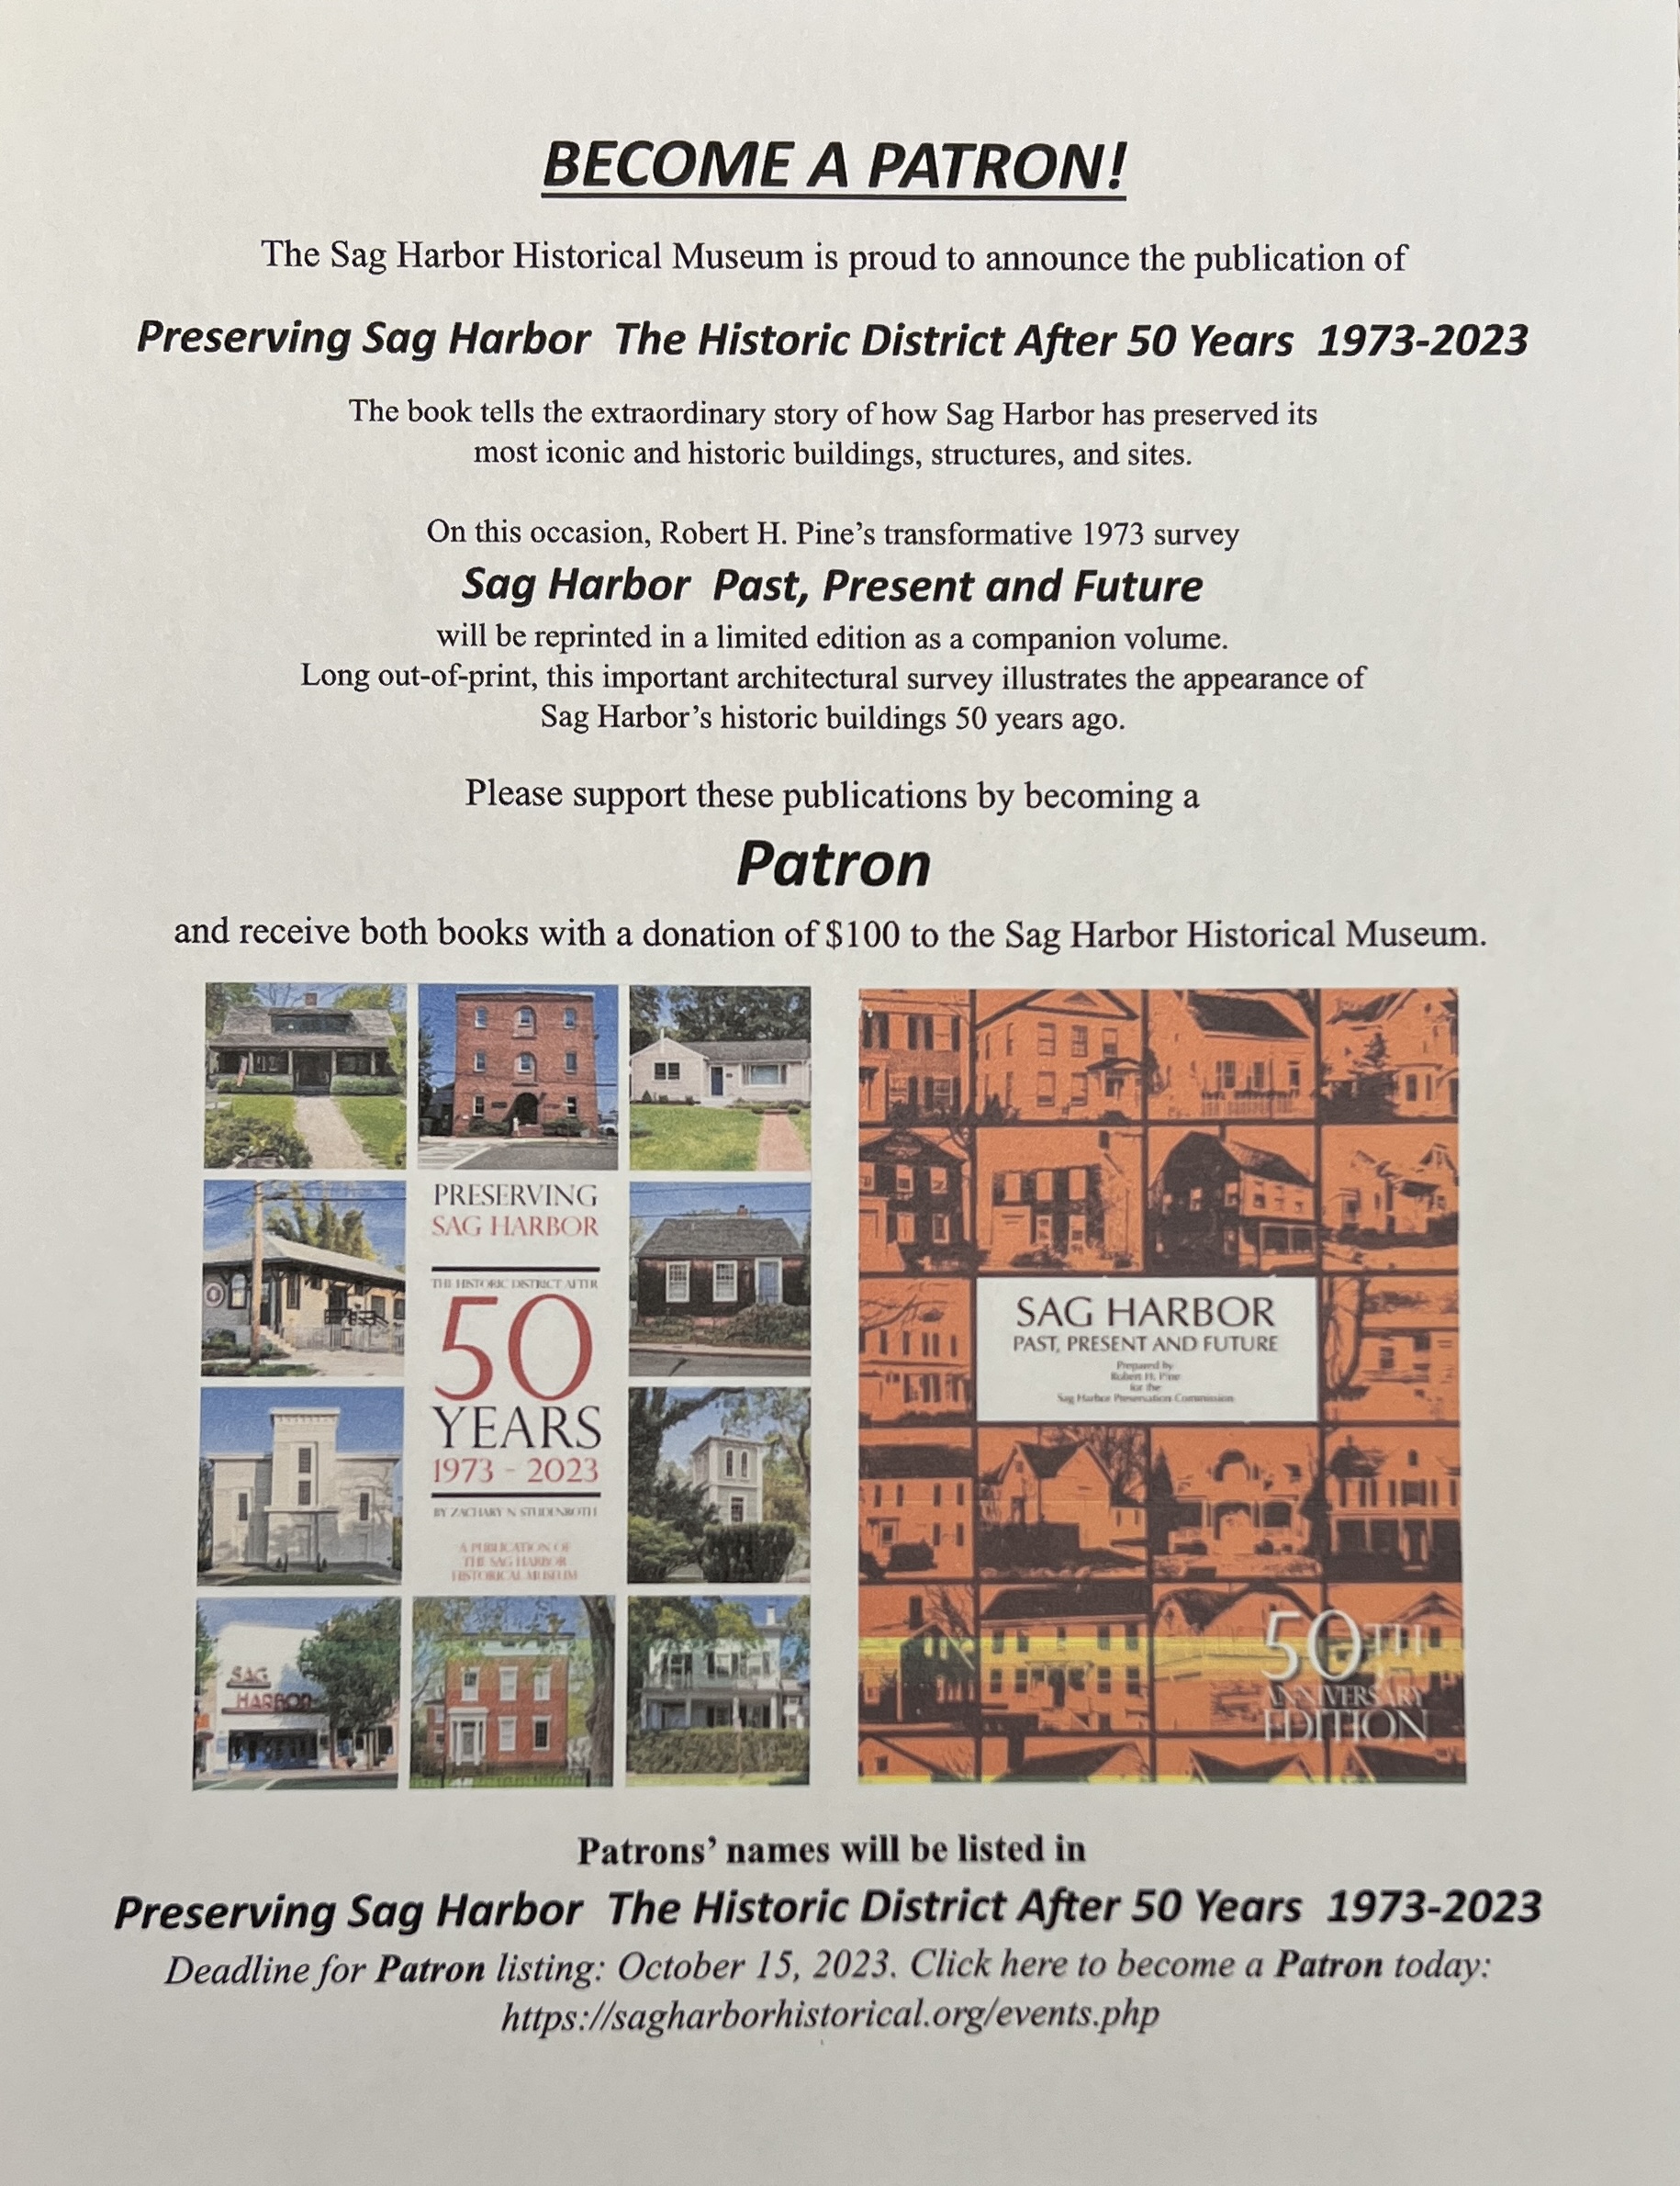 Become a Patron and support Preserving Sag Harbor The Historic District After 50 Years  1973-2023